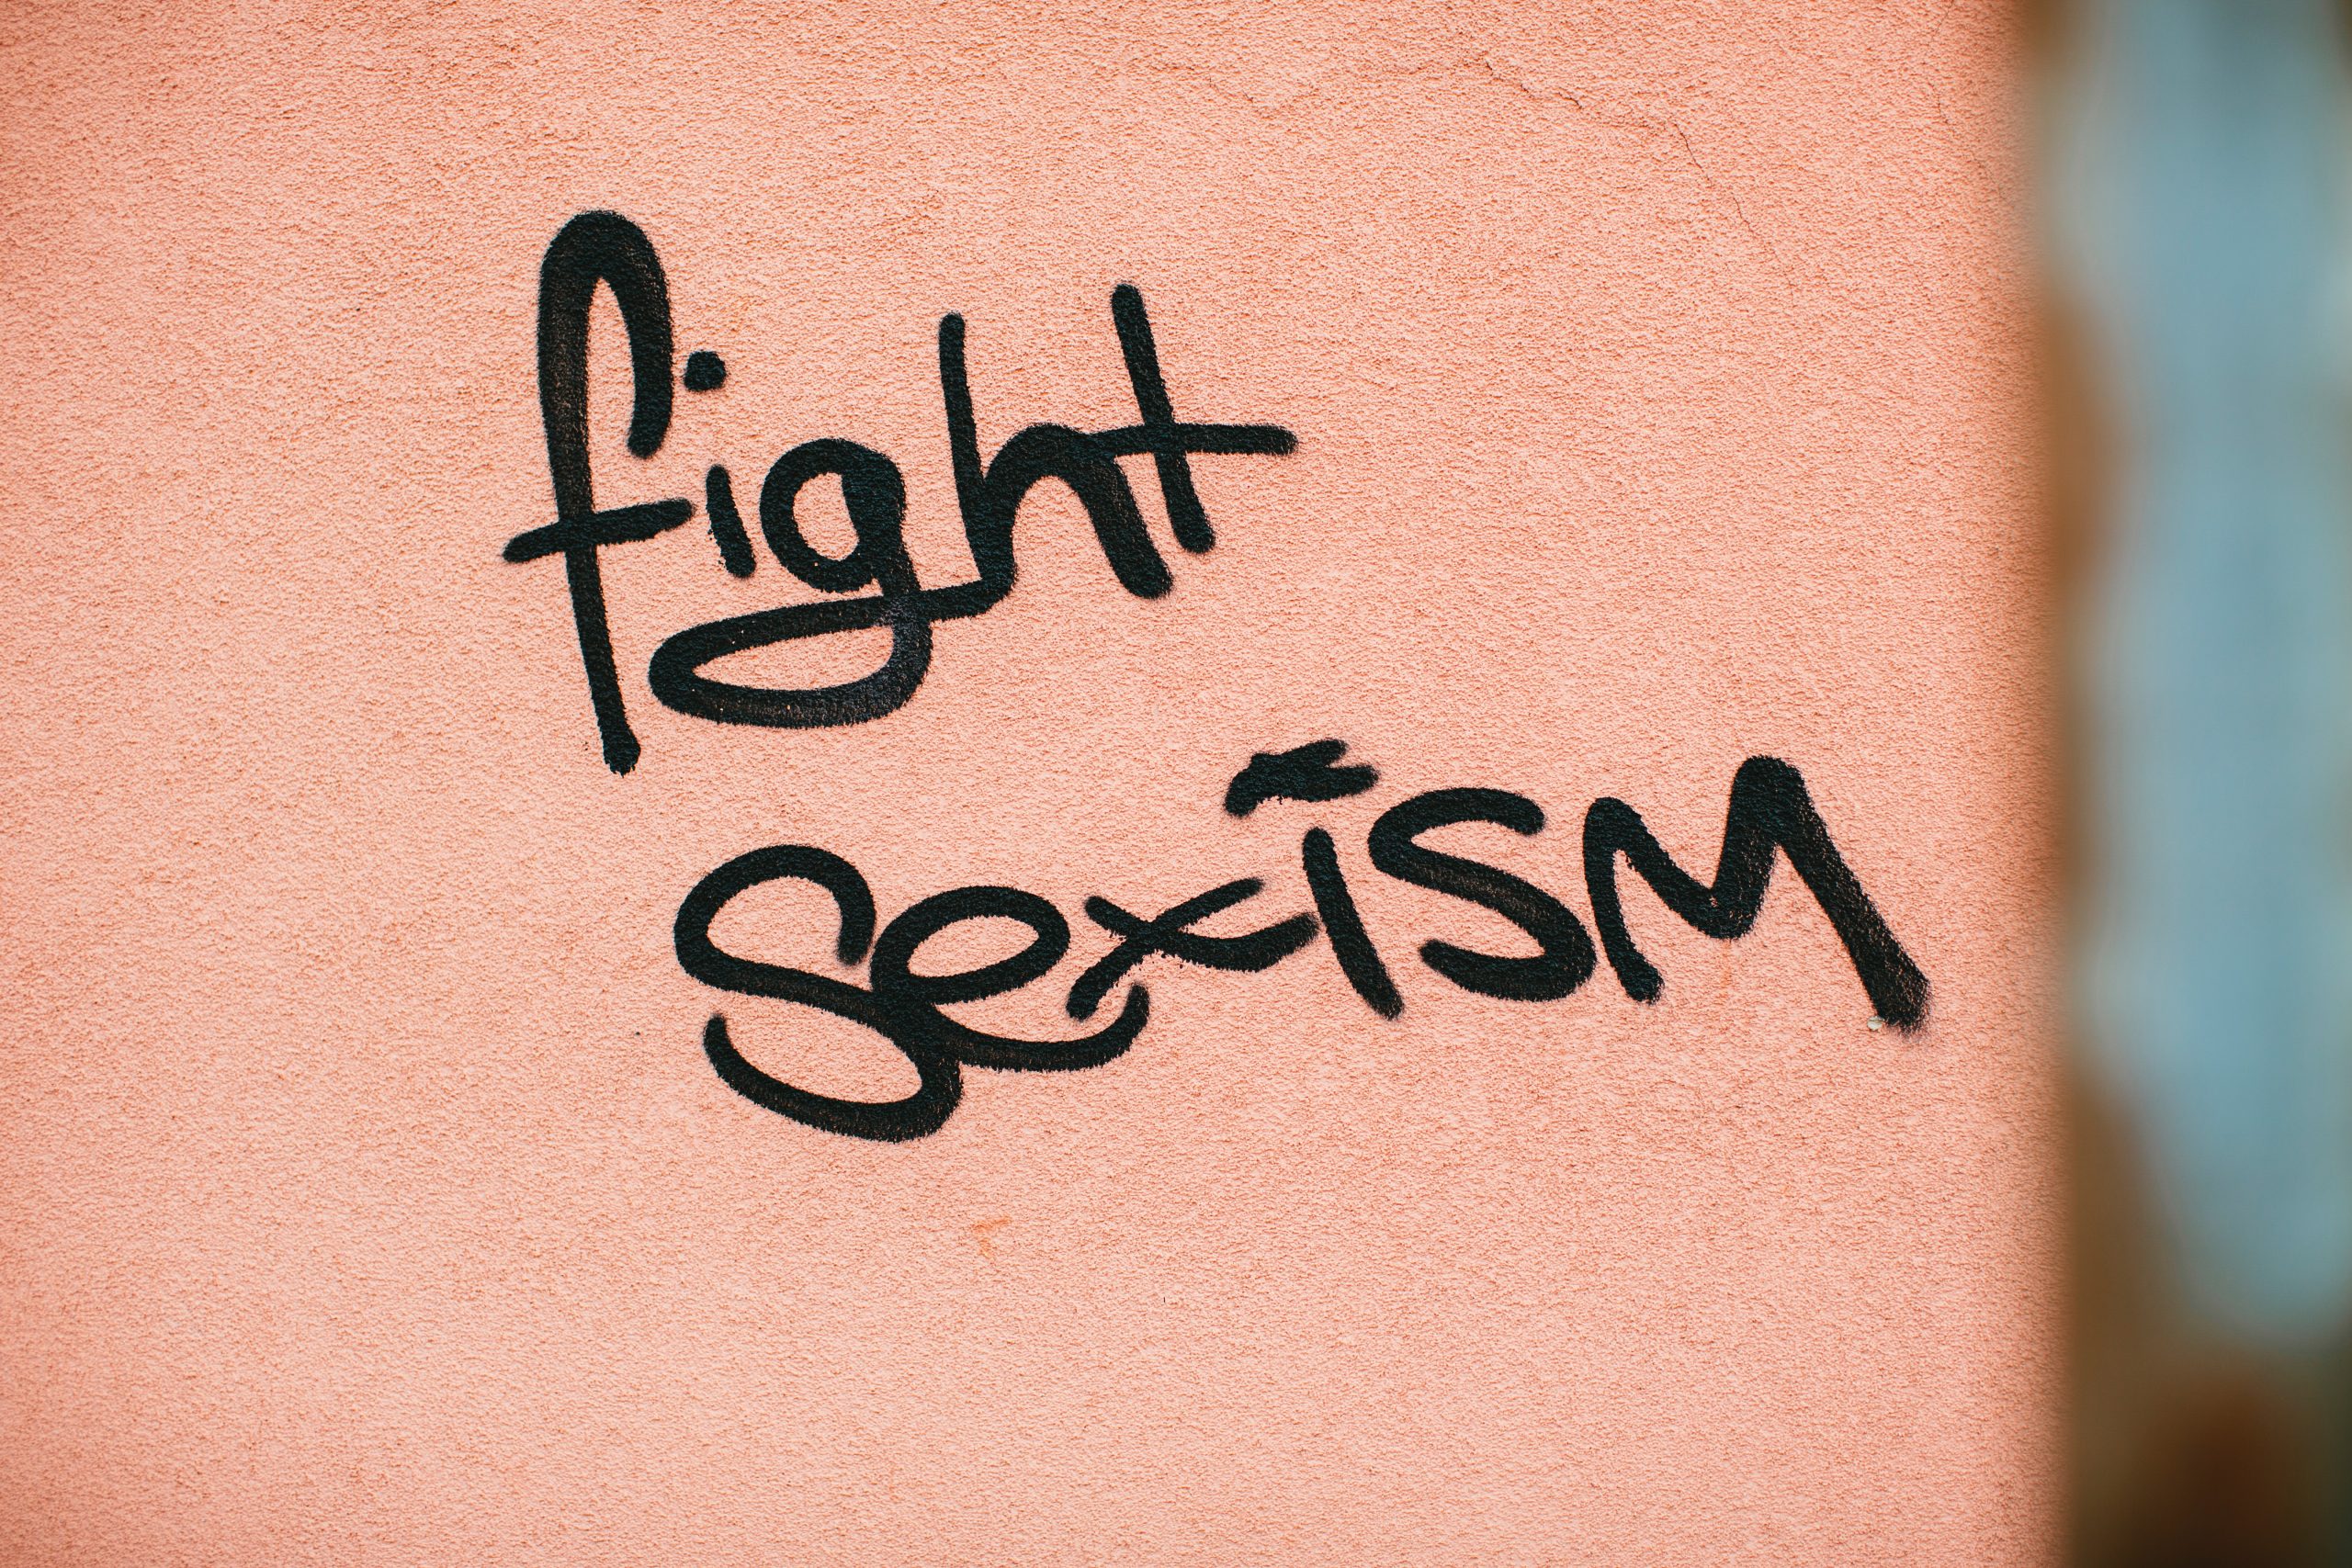 Graffiti reads "fight sexism" on a pink wall